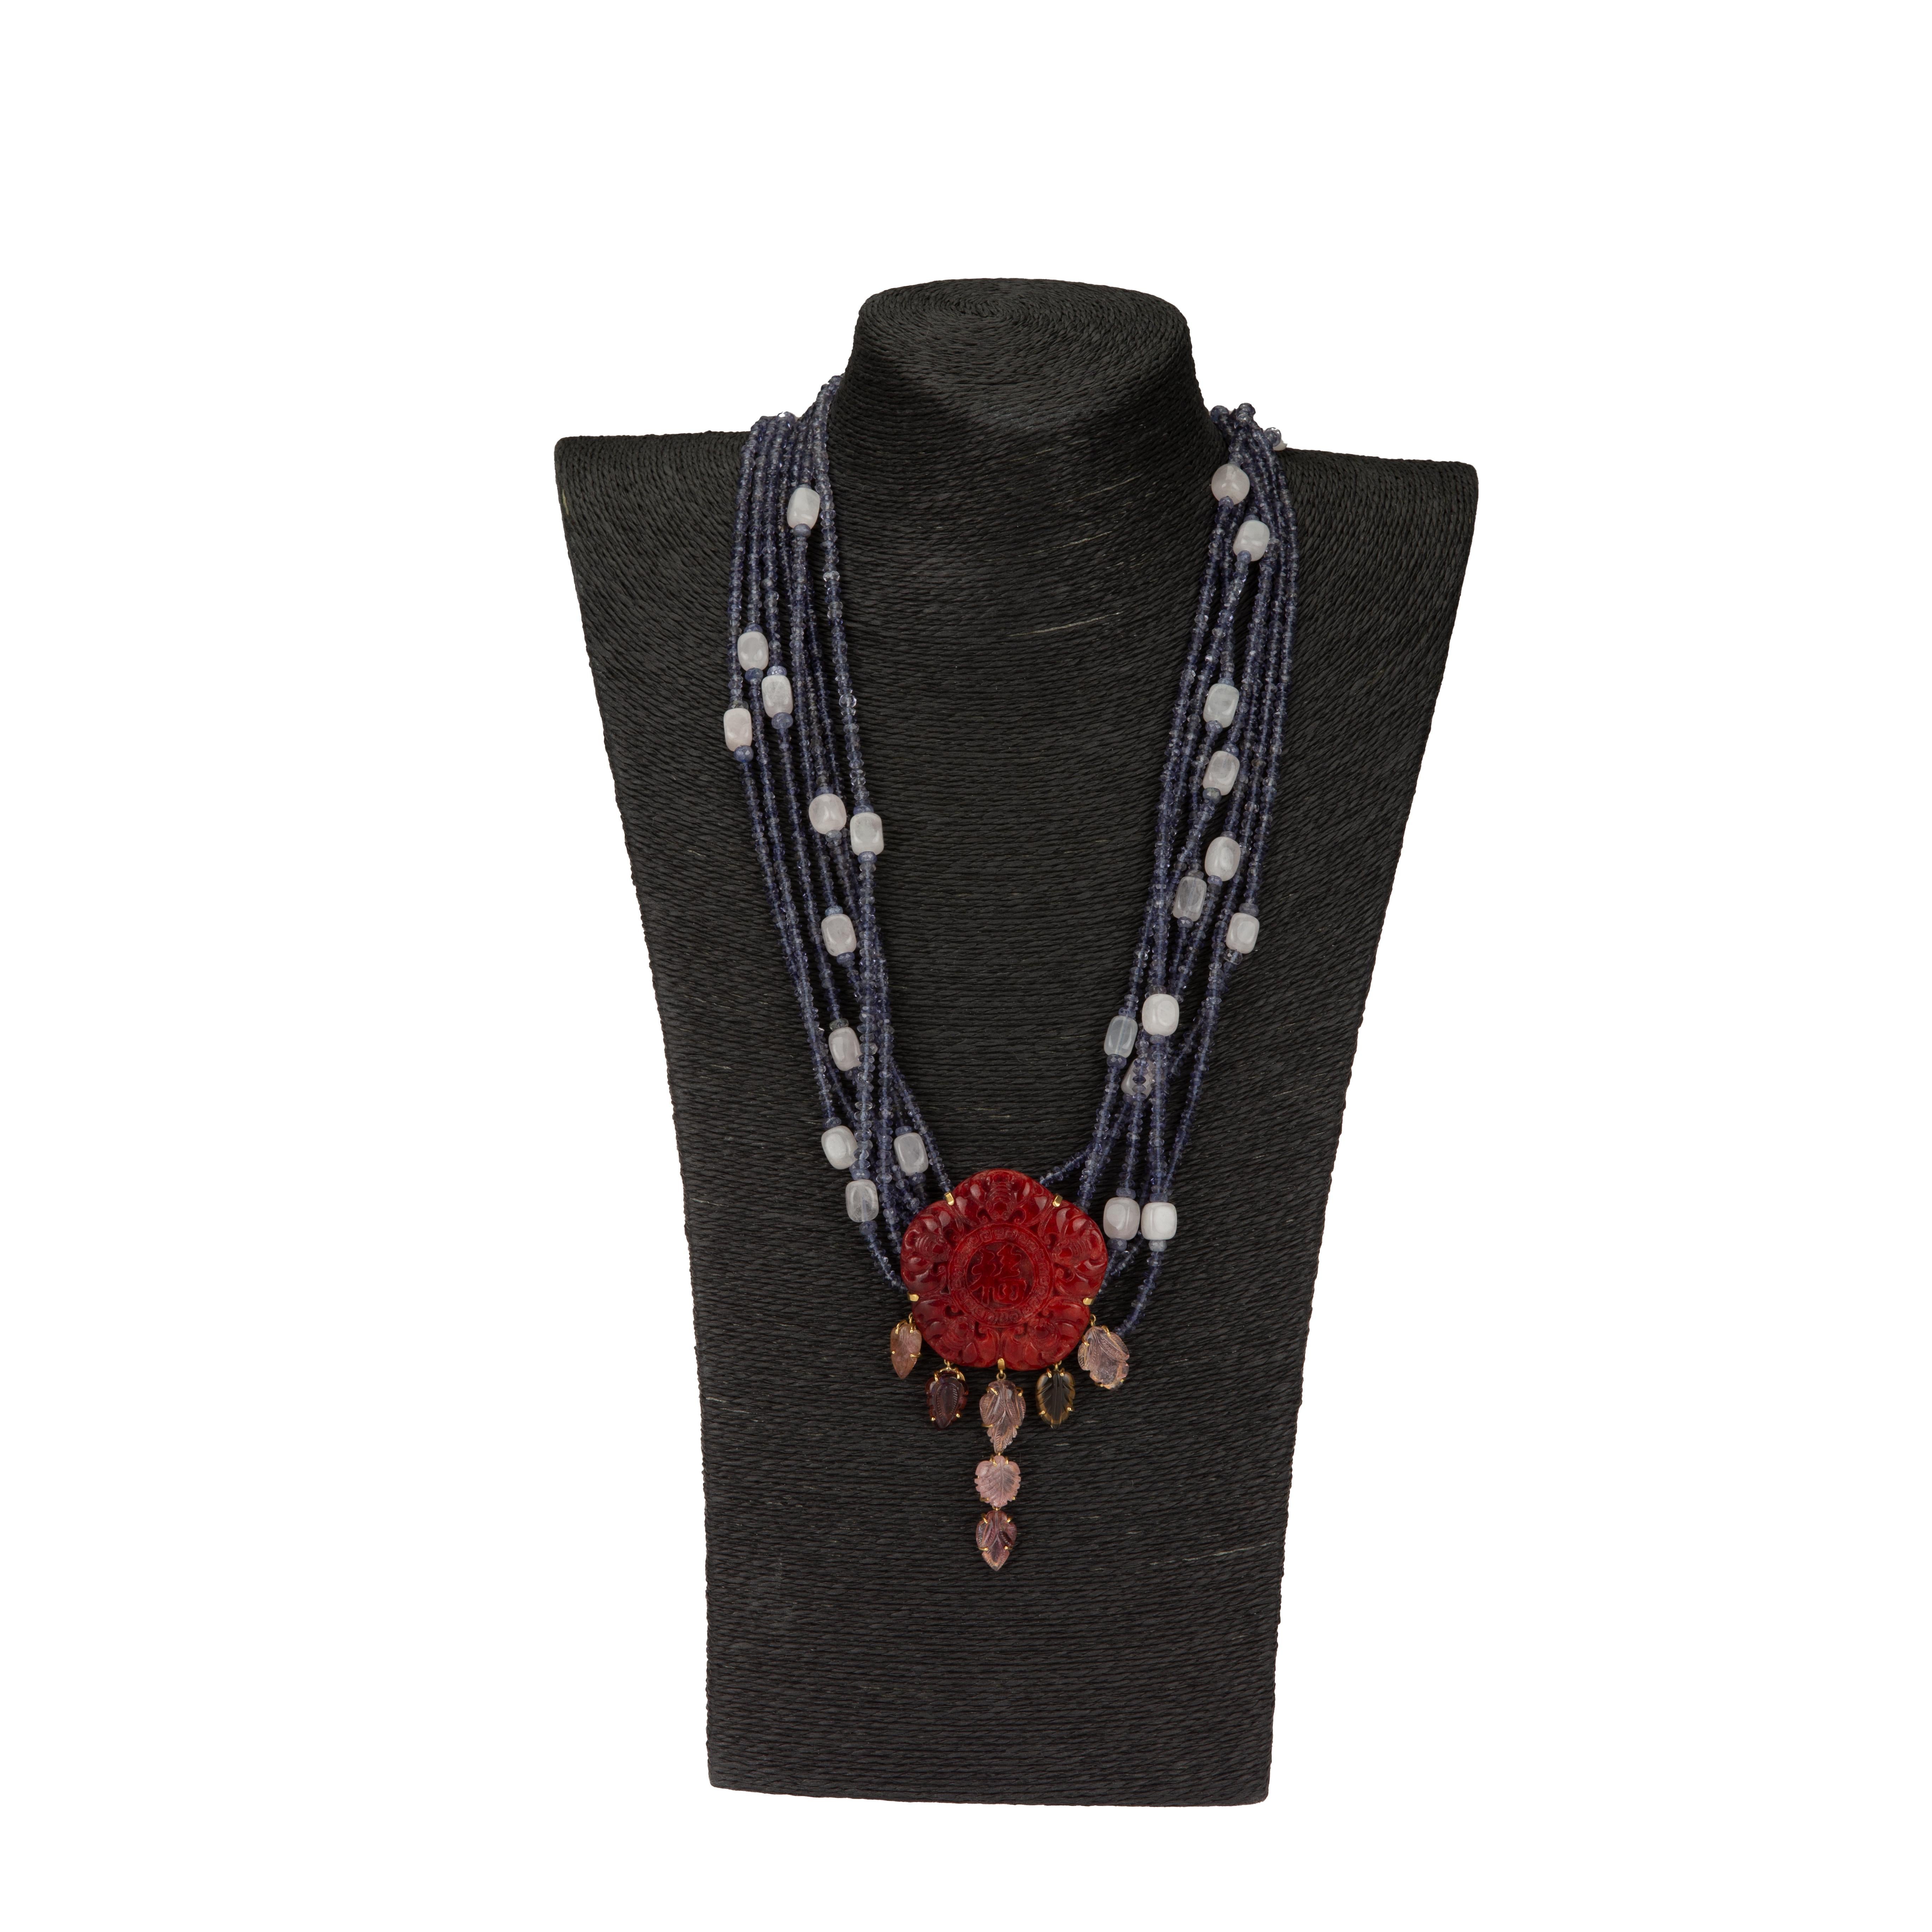 Amazing multi thread necklace with  faced tanzanite stone, rose quartz, central with carved Jace surrounded with tourmaline carved leaf, 18 k Gold gr 13,80. Length 58 cm.
All Giulia Colussi jewelry is new and has never been previously owned or worn.